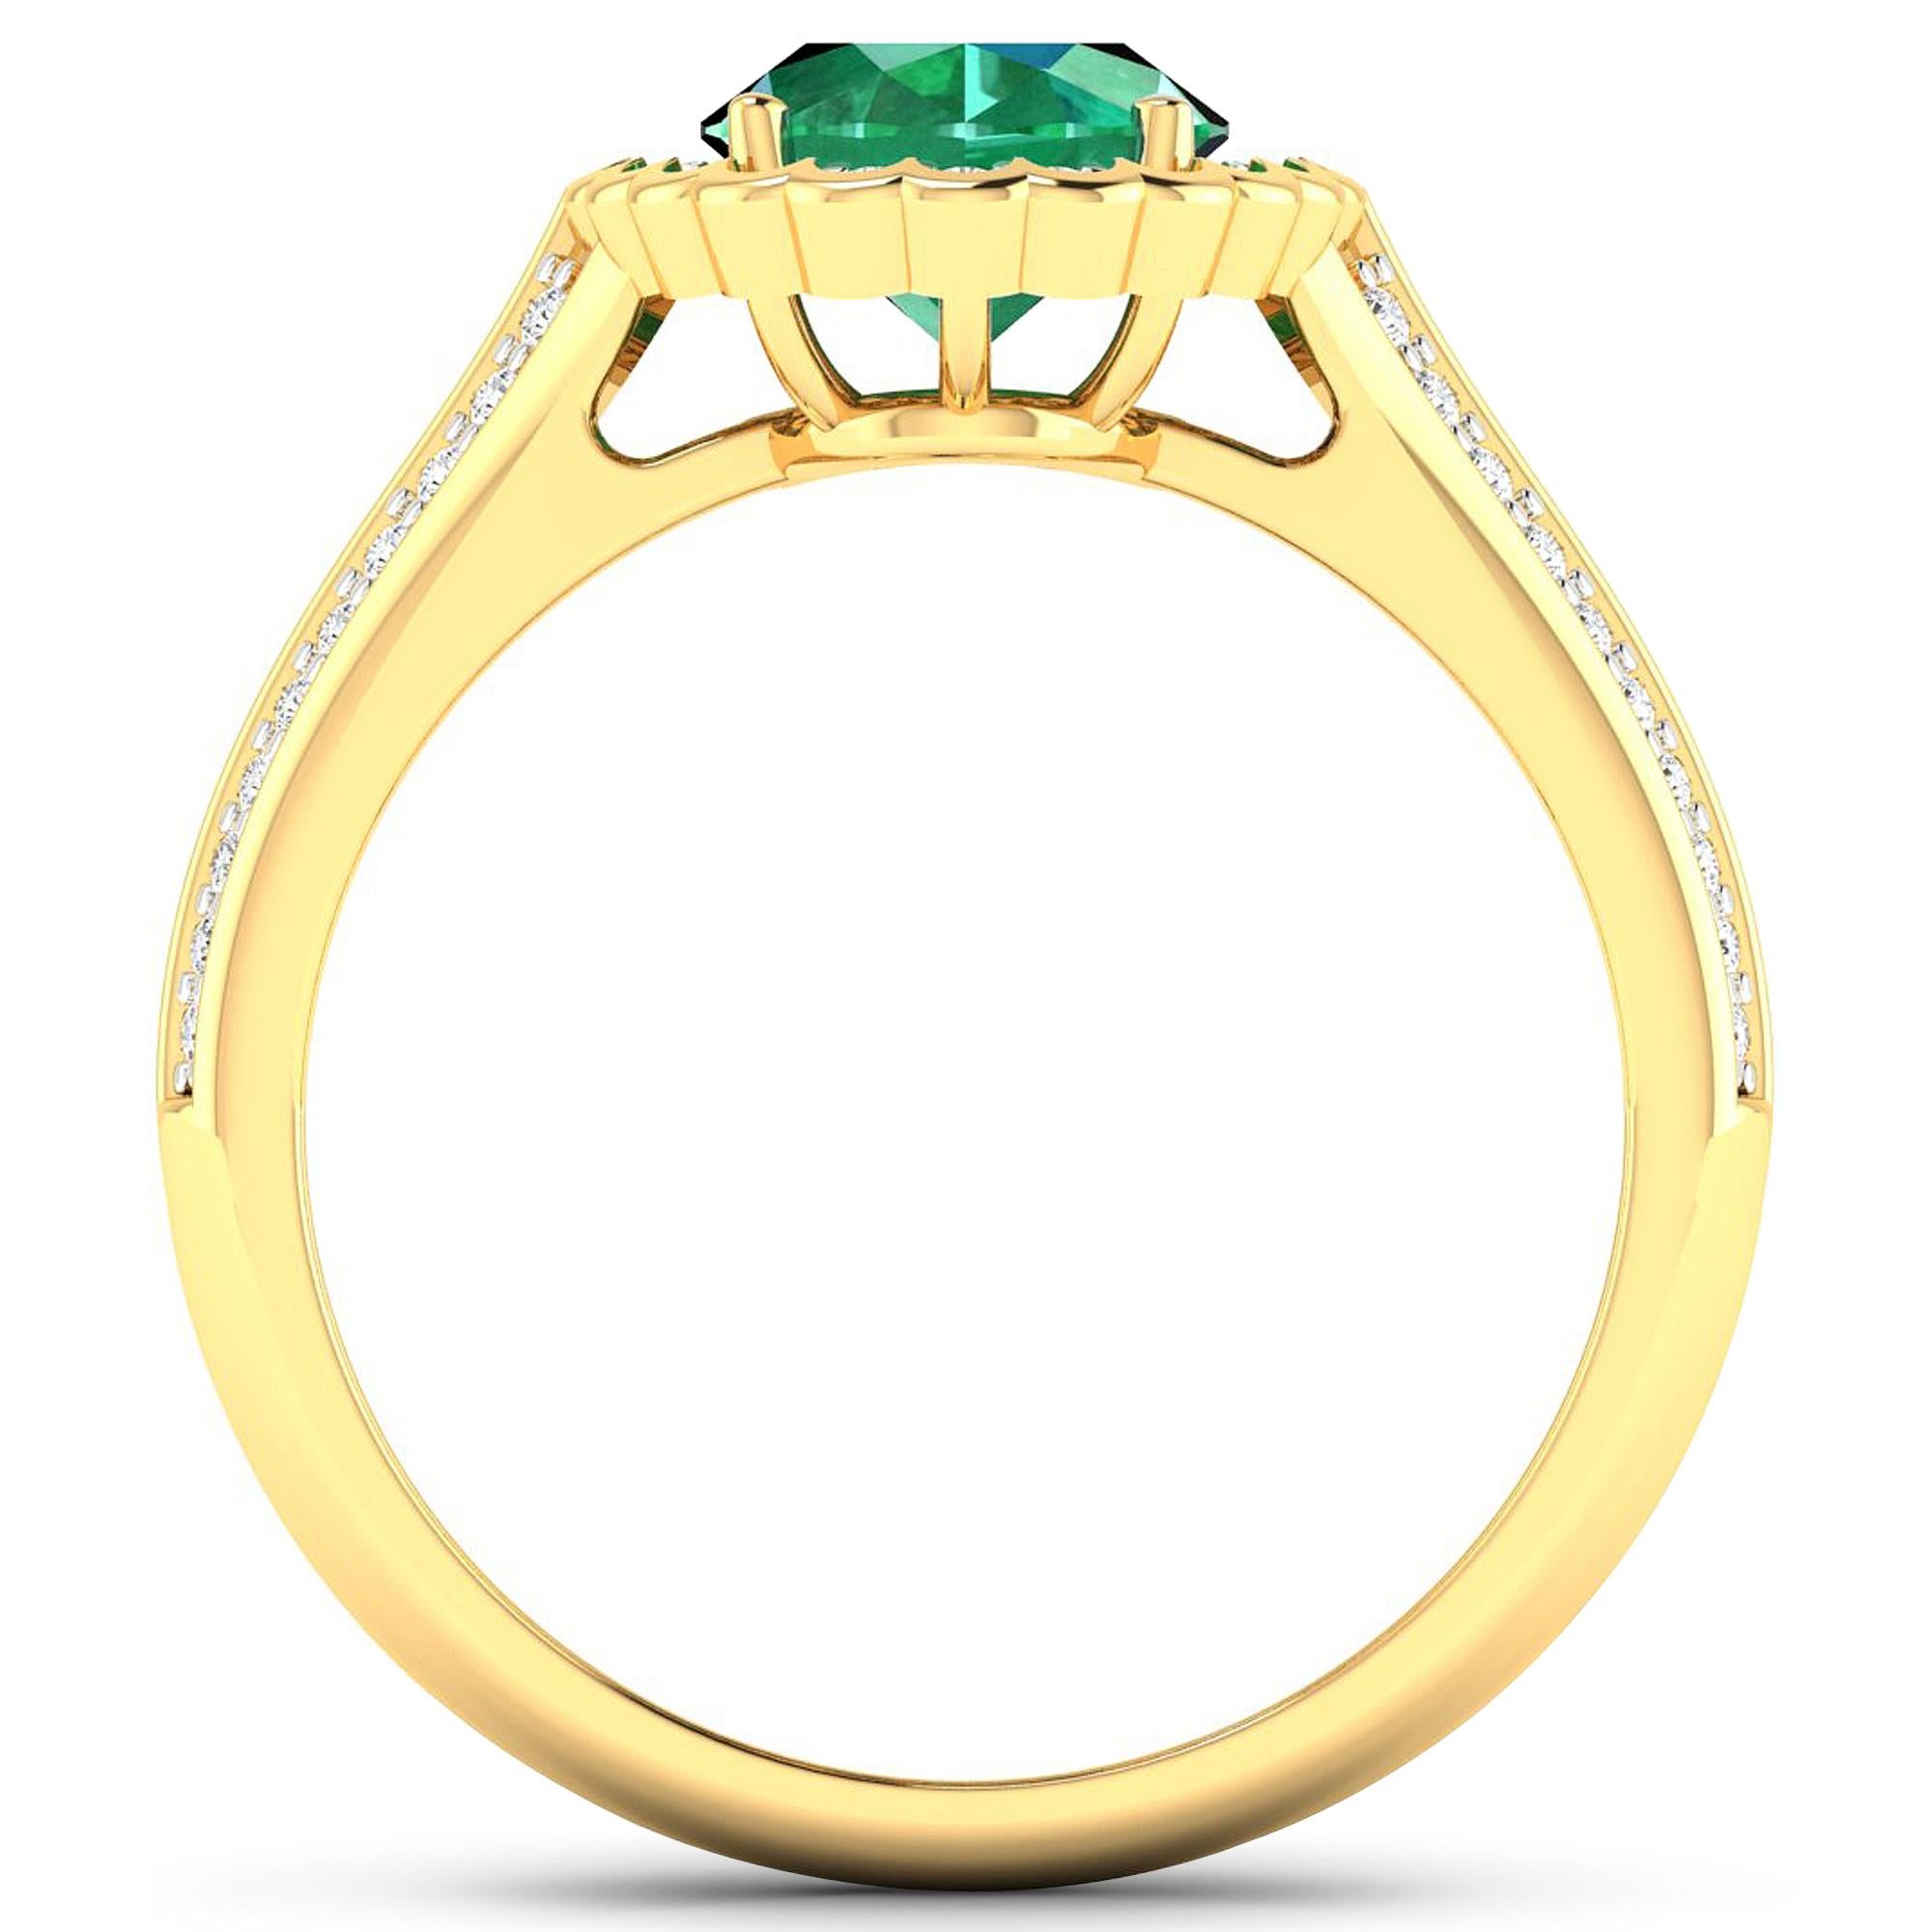 Emerald Gold Ring, 14Kt Gold Emerald & Diamond Engagement Ring, 2.07ctw.

Flaunt yourself with this 14K Yellow Gold Emerald & White Diamond Engagement Ring. The setting is inlaid with 62 accented full-cut White Diamond round stones for a total stone